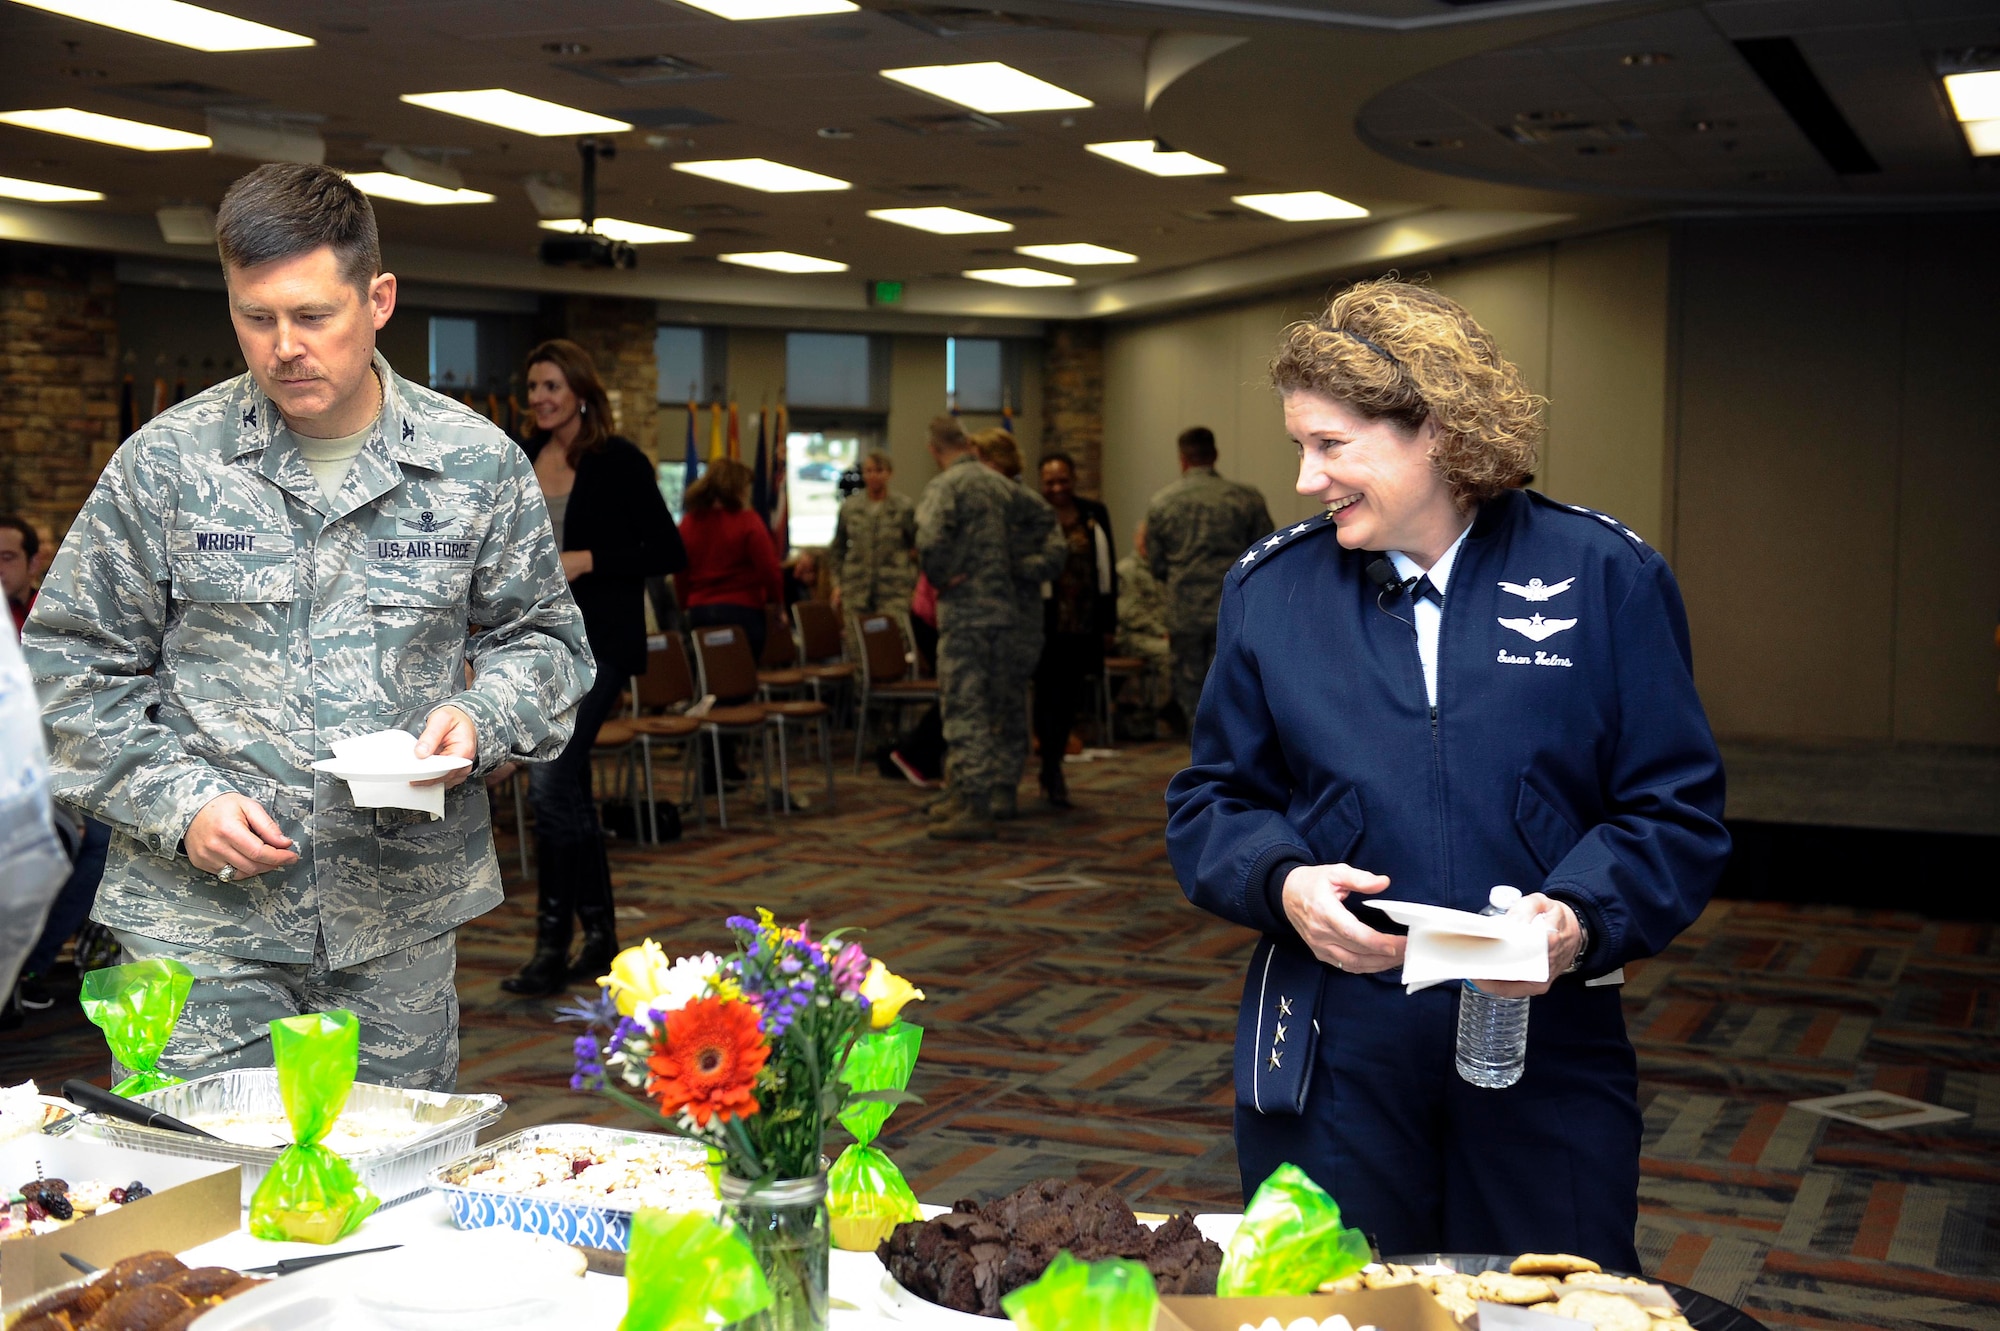 Lt. Gen. Susan Helms, former 14th Air Force, Air Force Space Command, Joint Functional Component Command for Space and U.S. Strategic Command commander, selects from a wide variety of treats during a dessert social March 21, 2014, at the Air Reserve Personnel Center conference room on Buckley Air Force Base, Colo. Helms visited Buckley in honor of Women’s History Month to speak on the importance of having a positive attitude and the power of women believing in themselves. (U.S. Air Force photo by Airman 1st Class Samantha Saulsbury/Released)